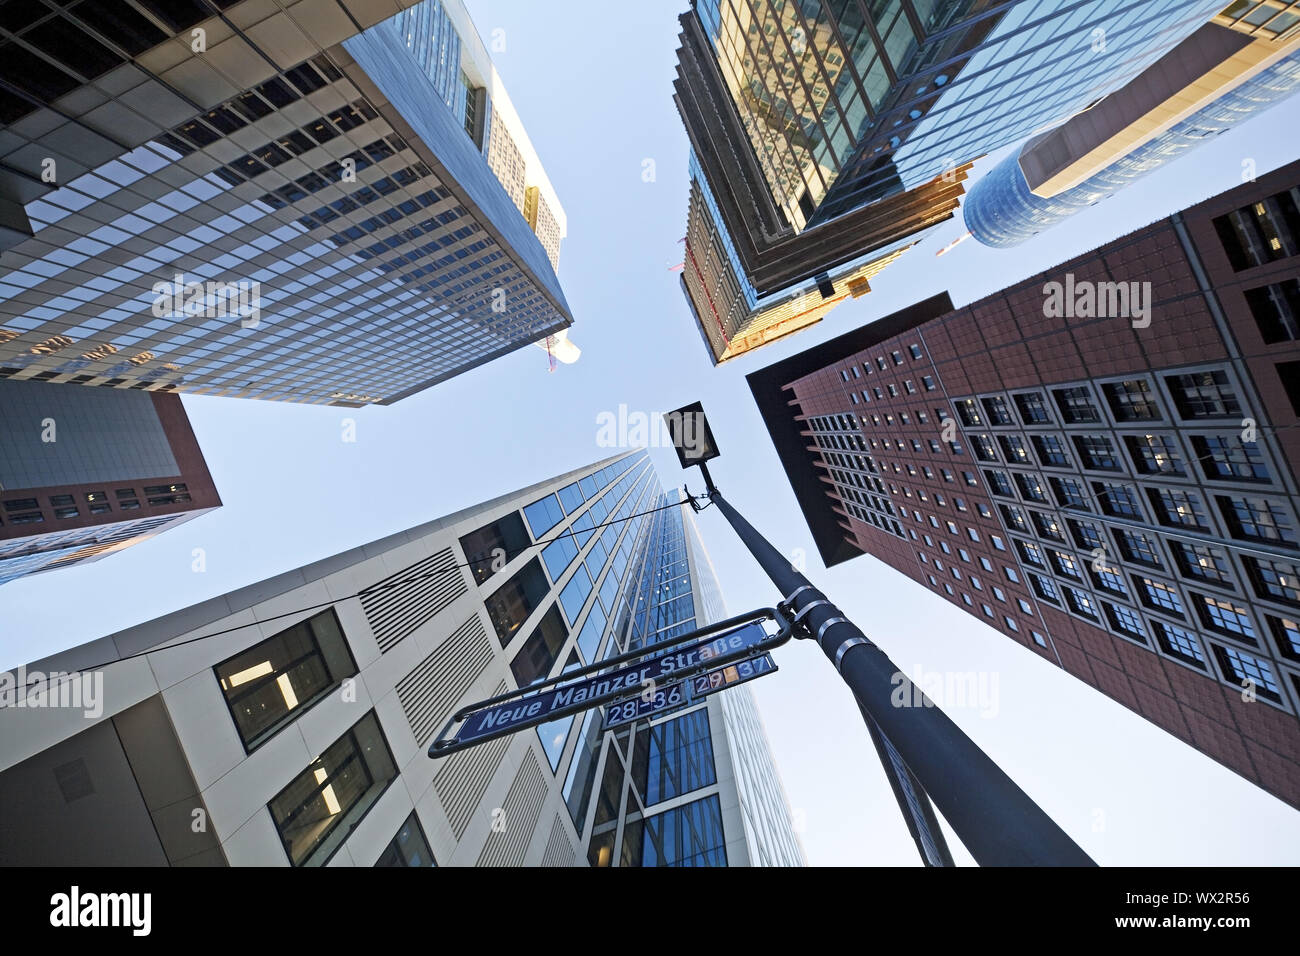 Frog's eye view of skyscrapers in the banking district, Frankfurt am Main, Hesse, Germany, Europe Stock Photo